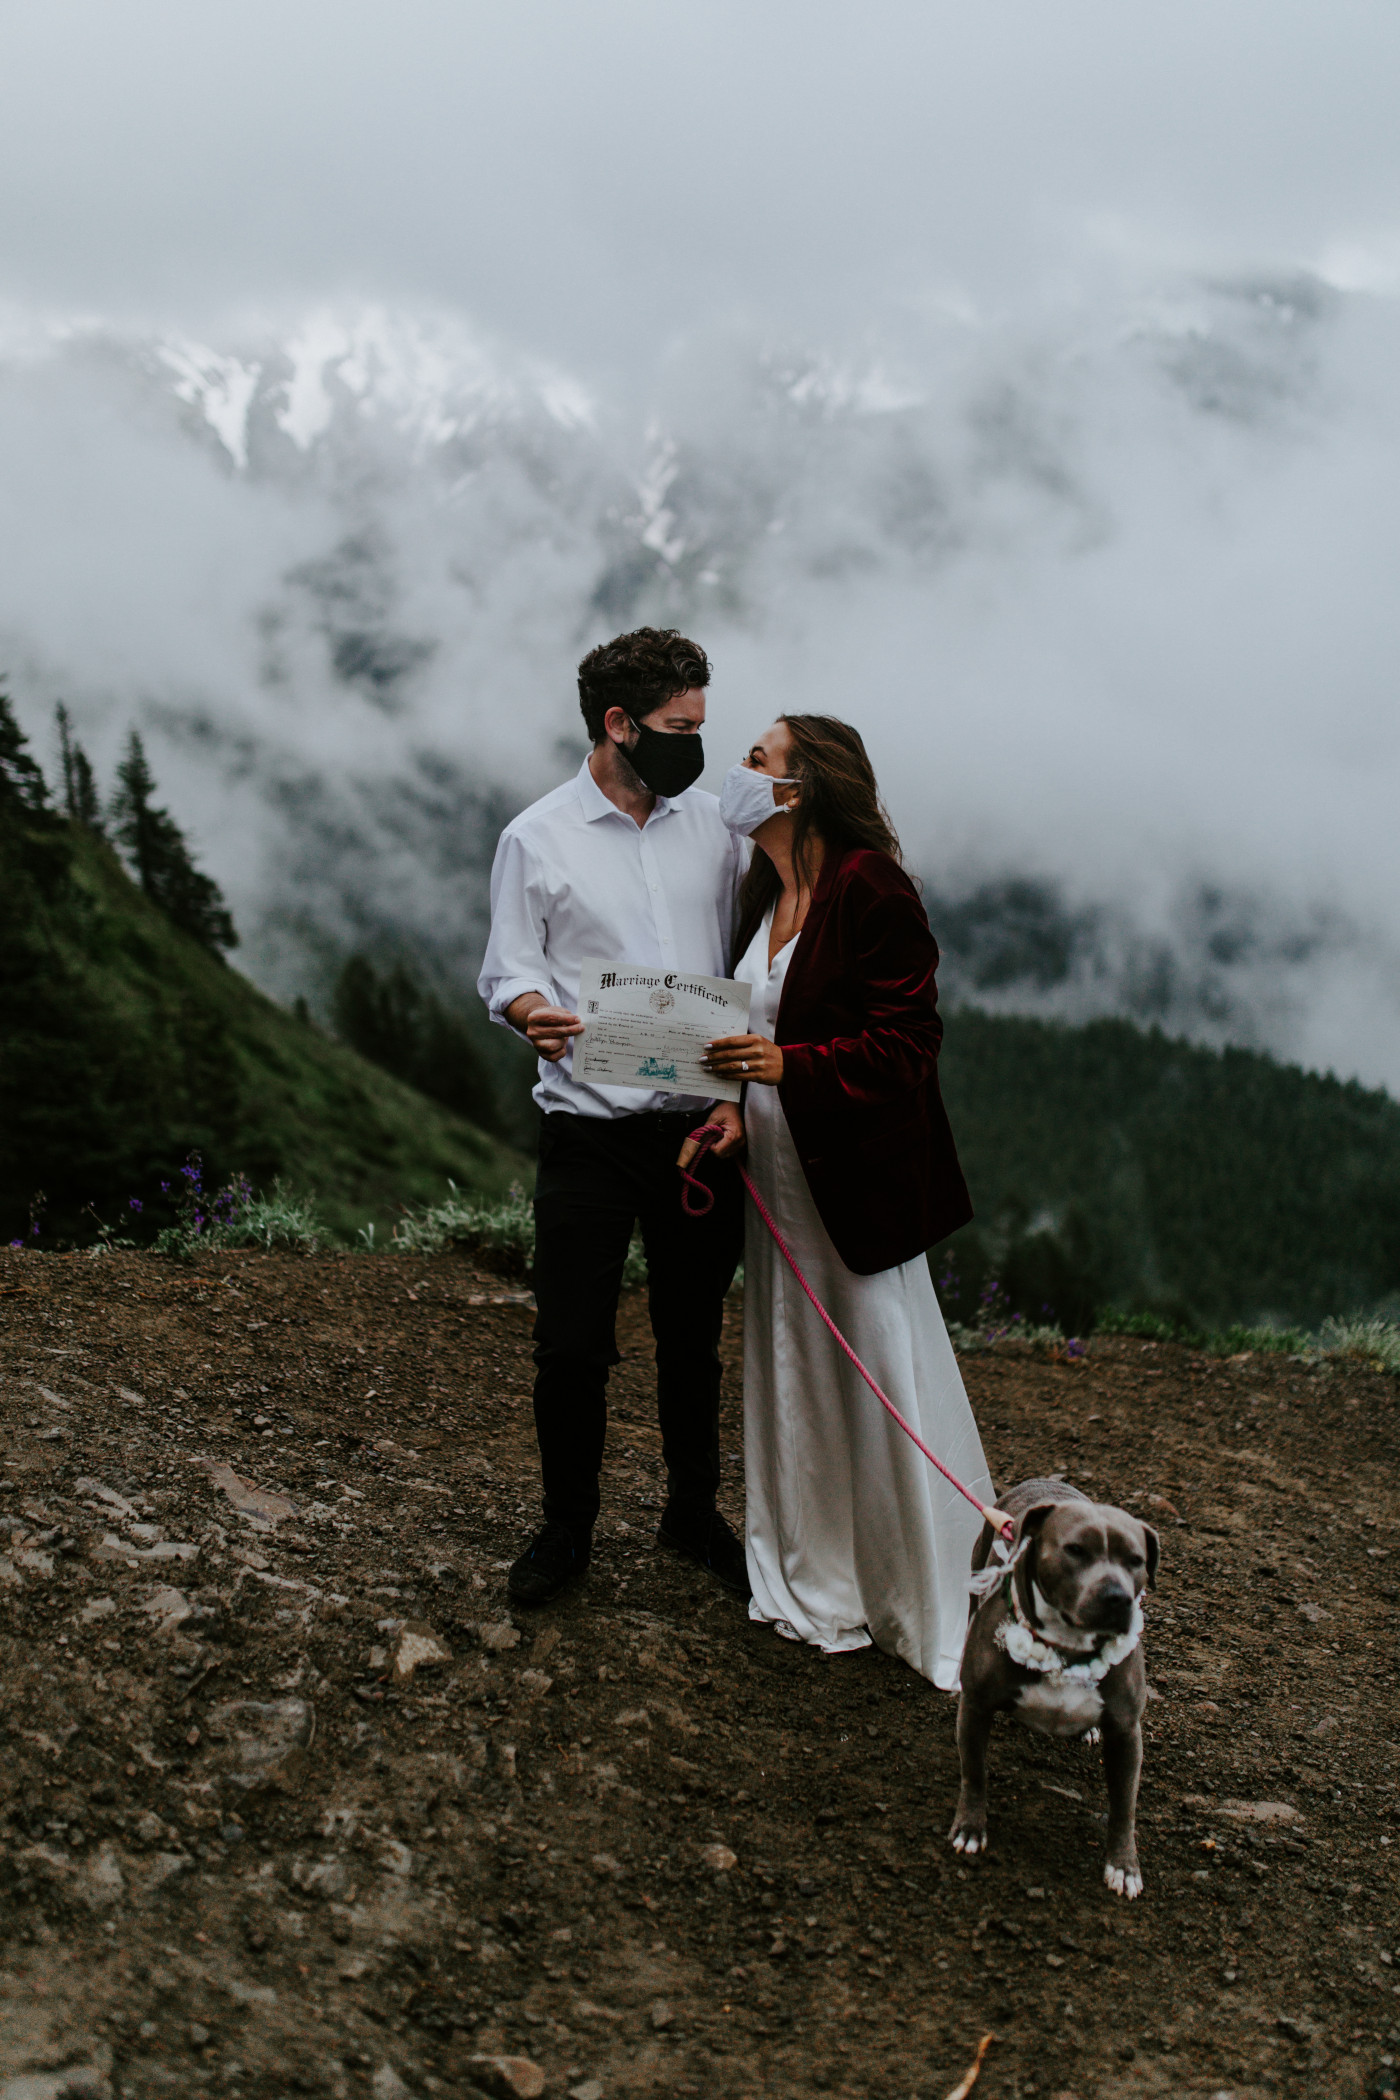 Katelyn and Murray stand in front of Mount Hood with their marriage license. Elopement wedding photography at Mount Hood by Sienna Plus Josh.